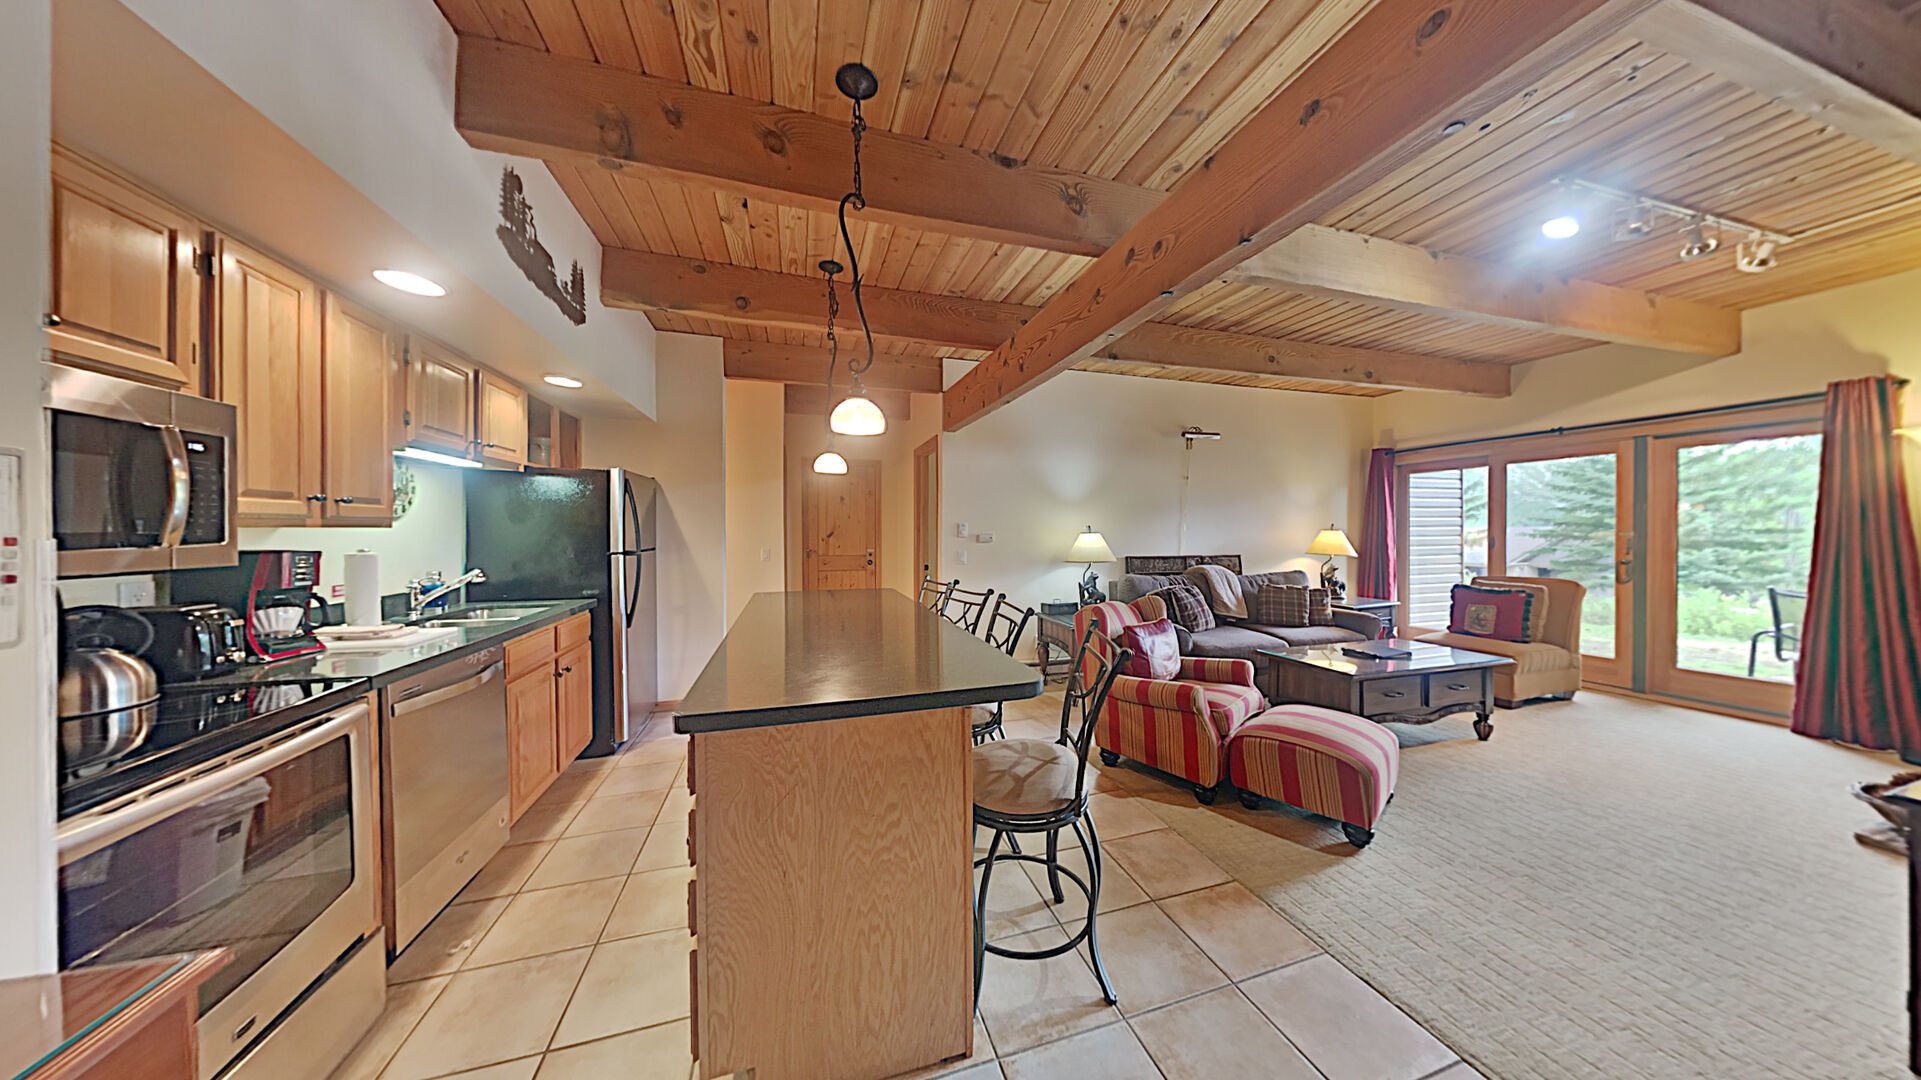 The kitchen and living area of one of our amazing Snowmass CO apartment rentals